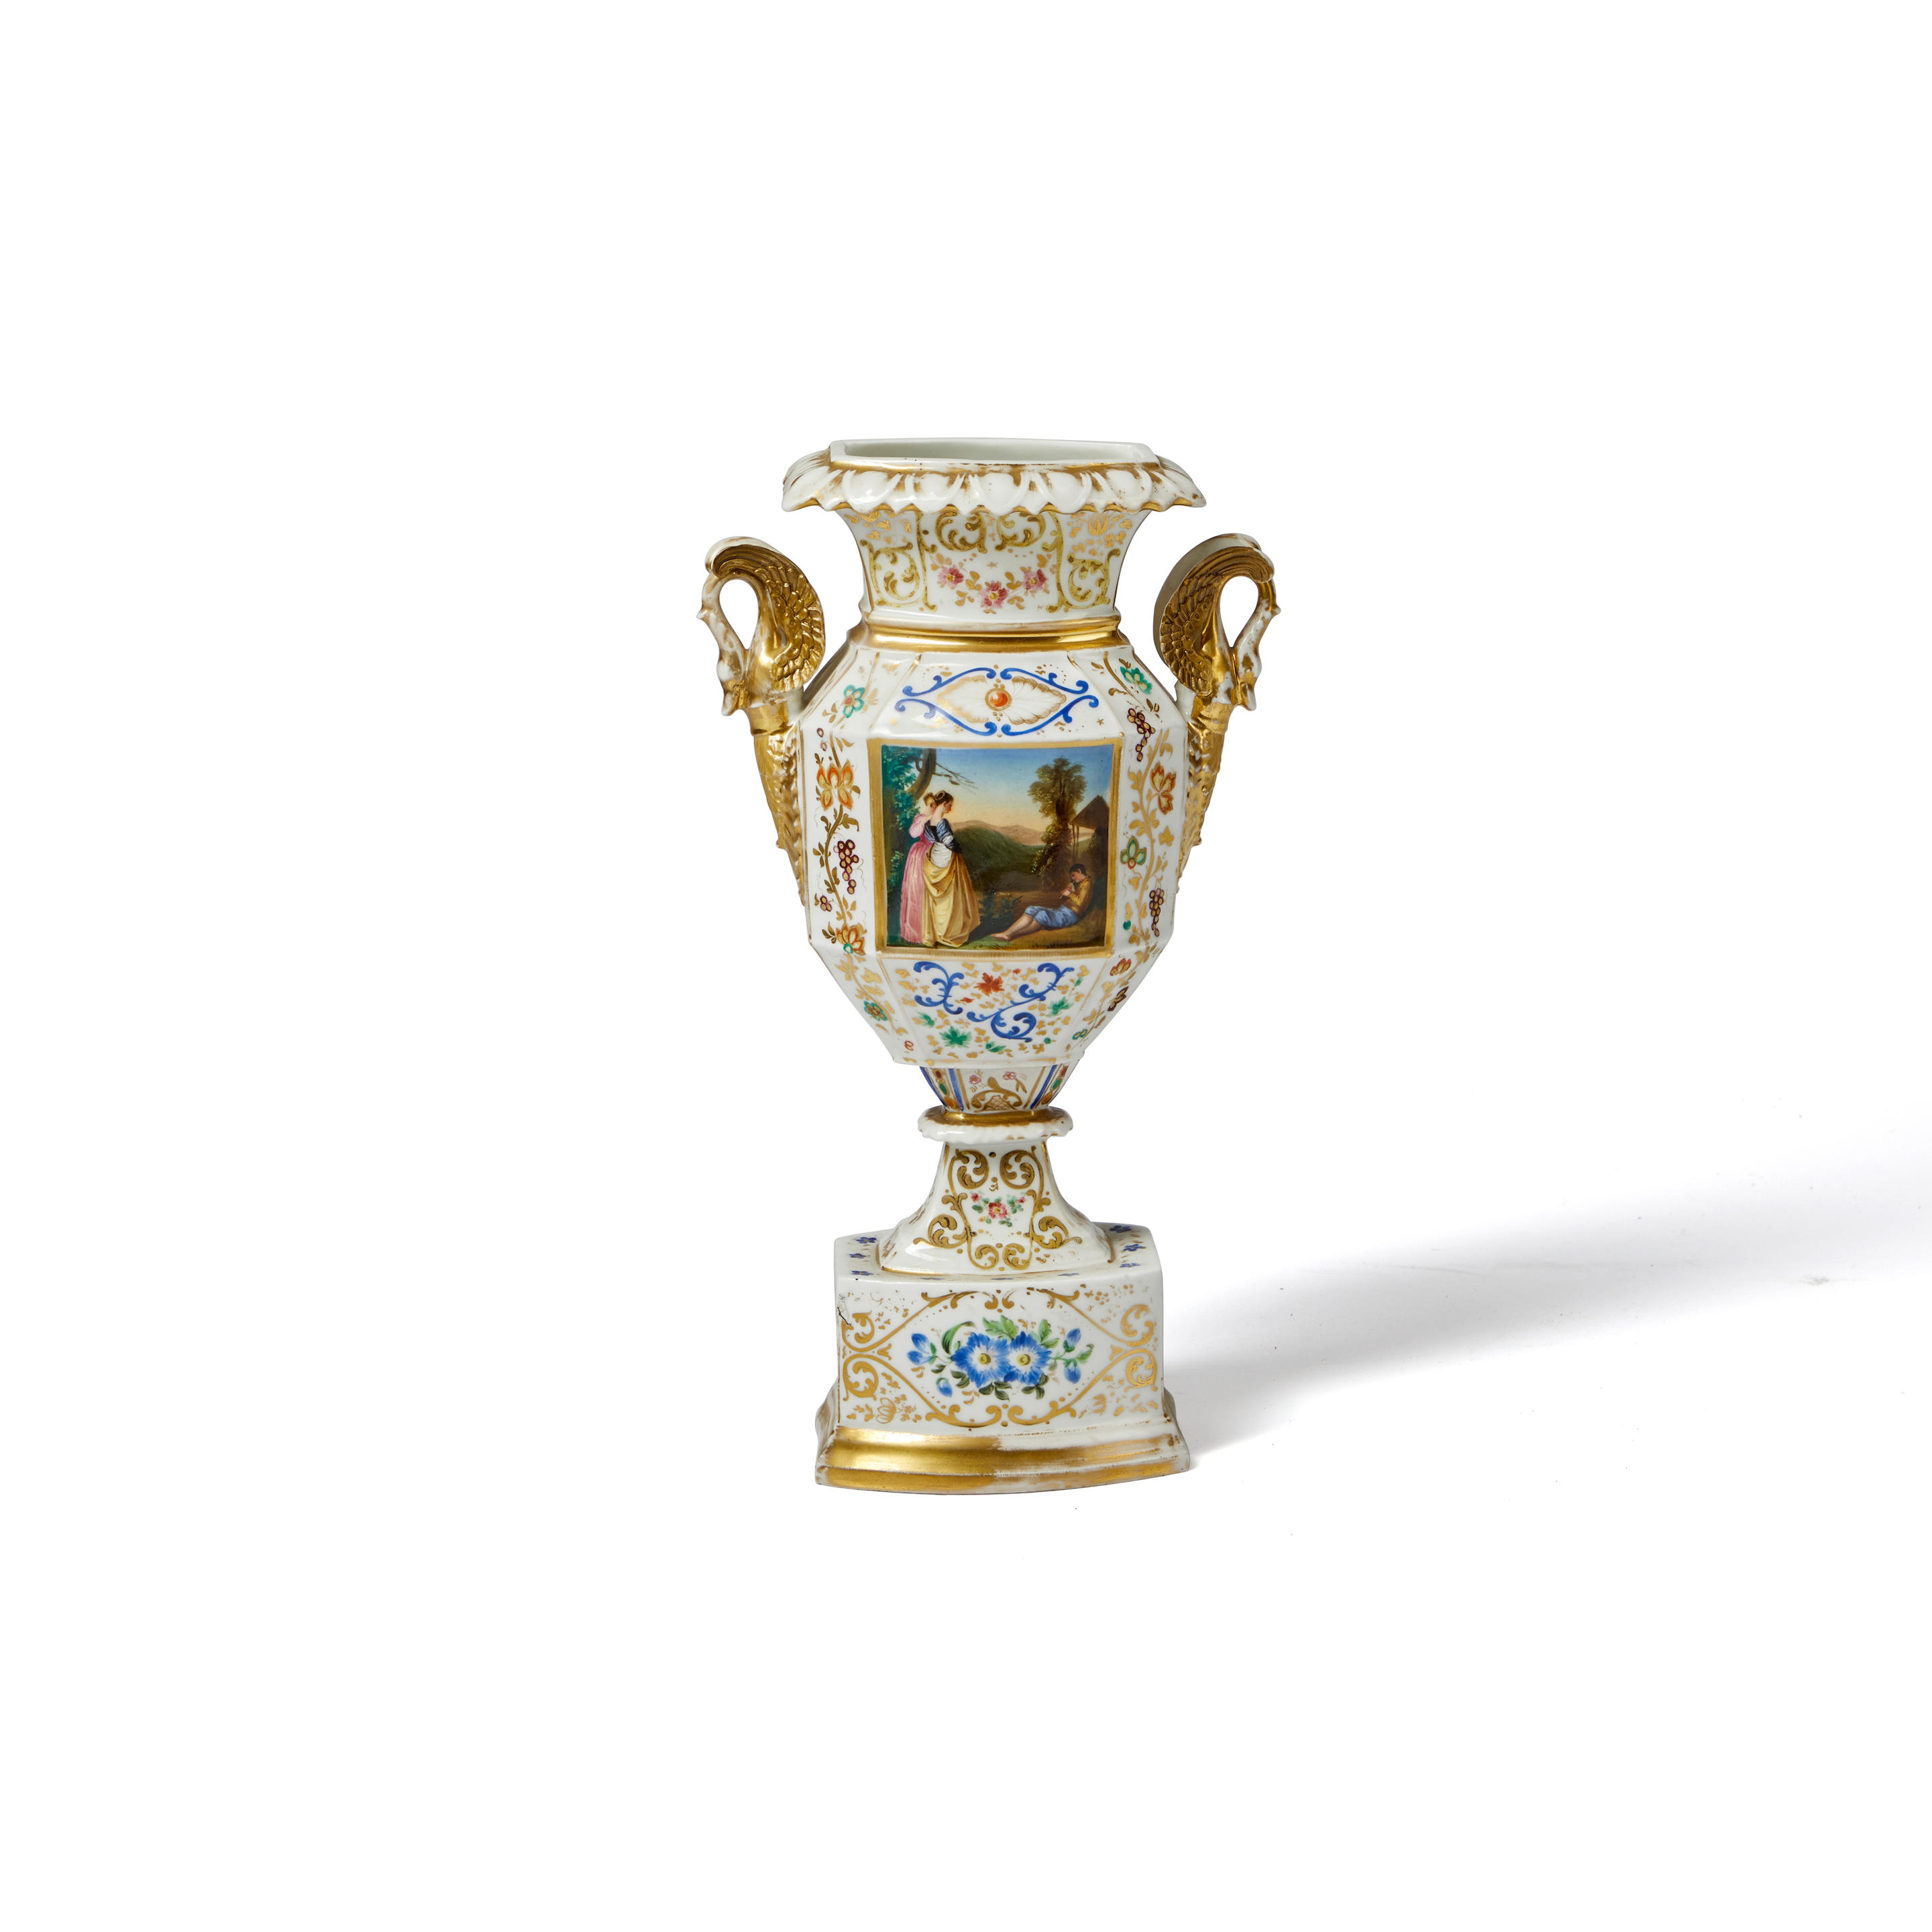 FRENCH PORCELAIN VASE with gilded